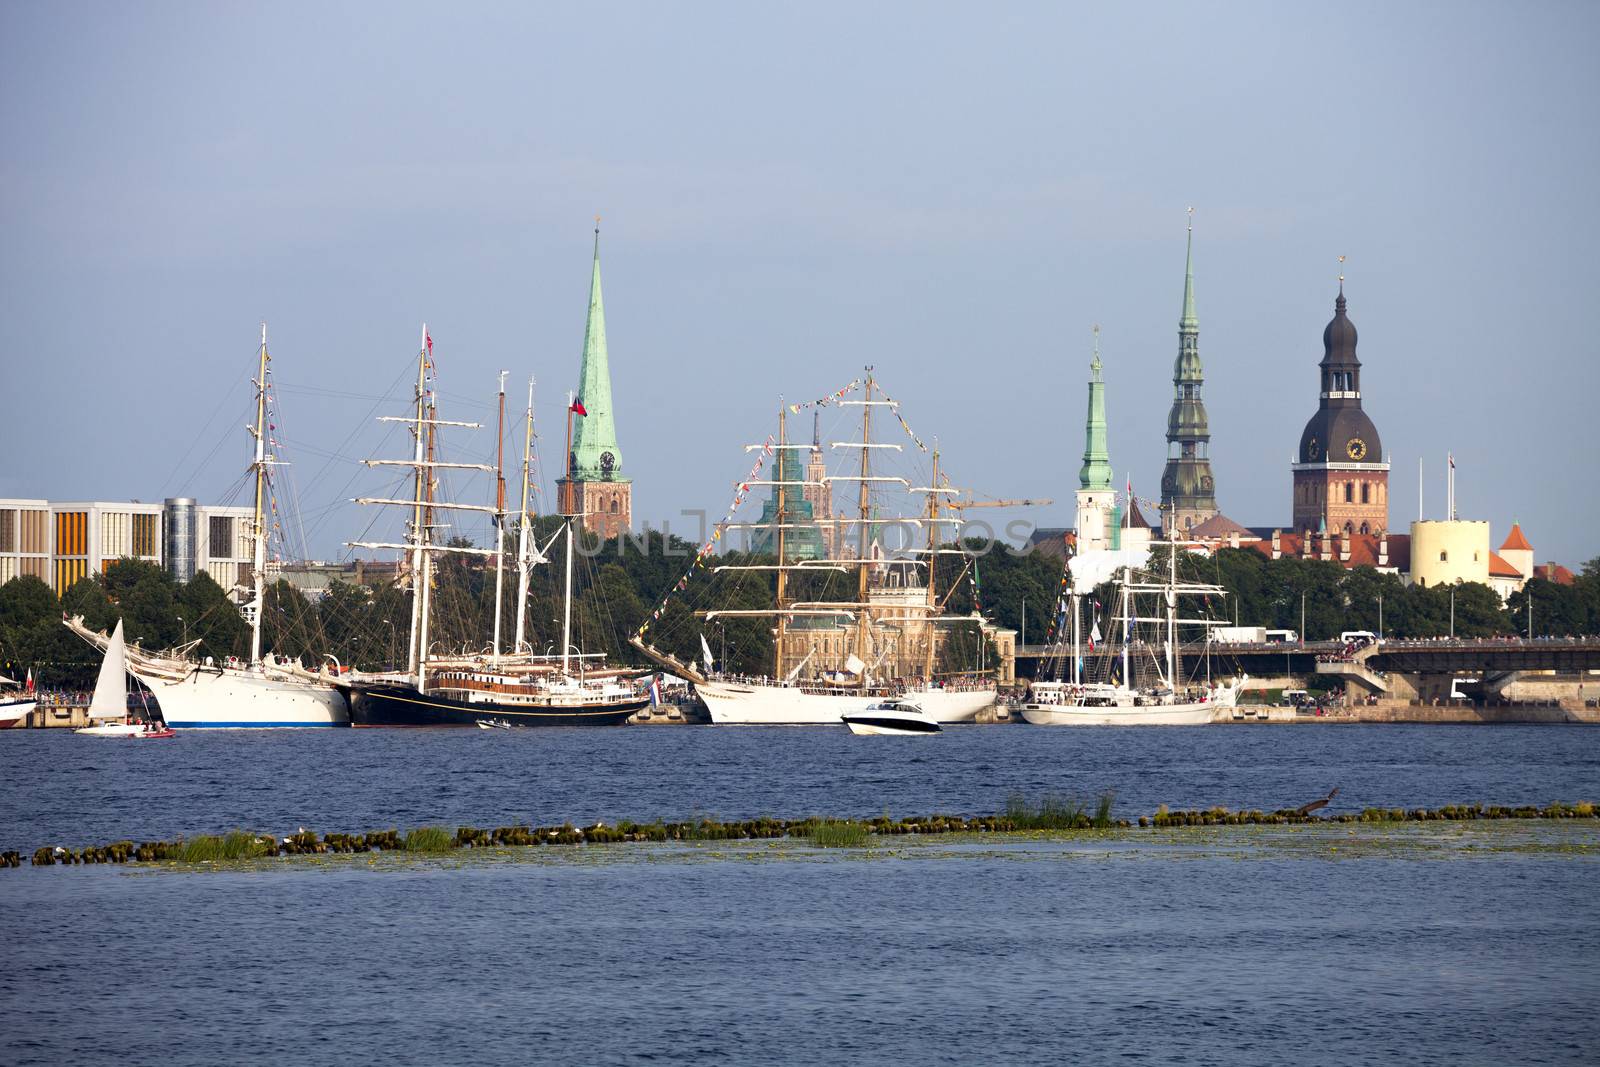 The tall ships races ships in port with traditional Riga skyline in background July 26, 2013 Riga, Latvia.